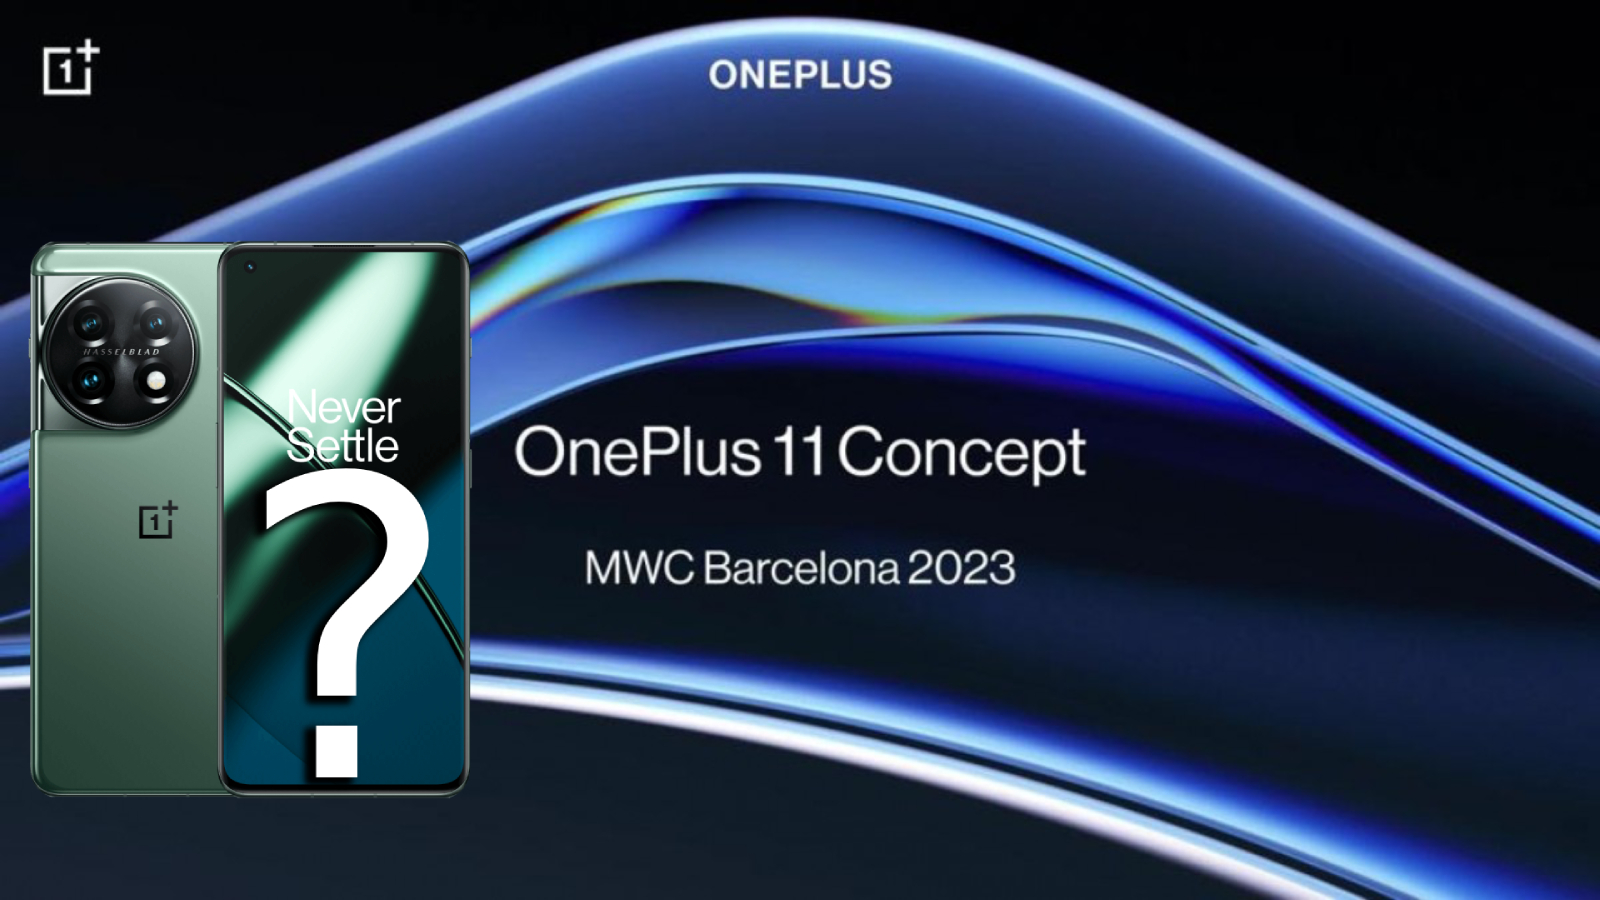 OnePlus 11 Concept phone to debut at MWC 2023 in Barcelona